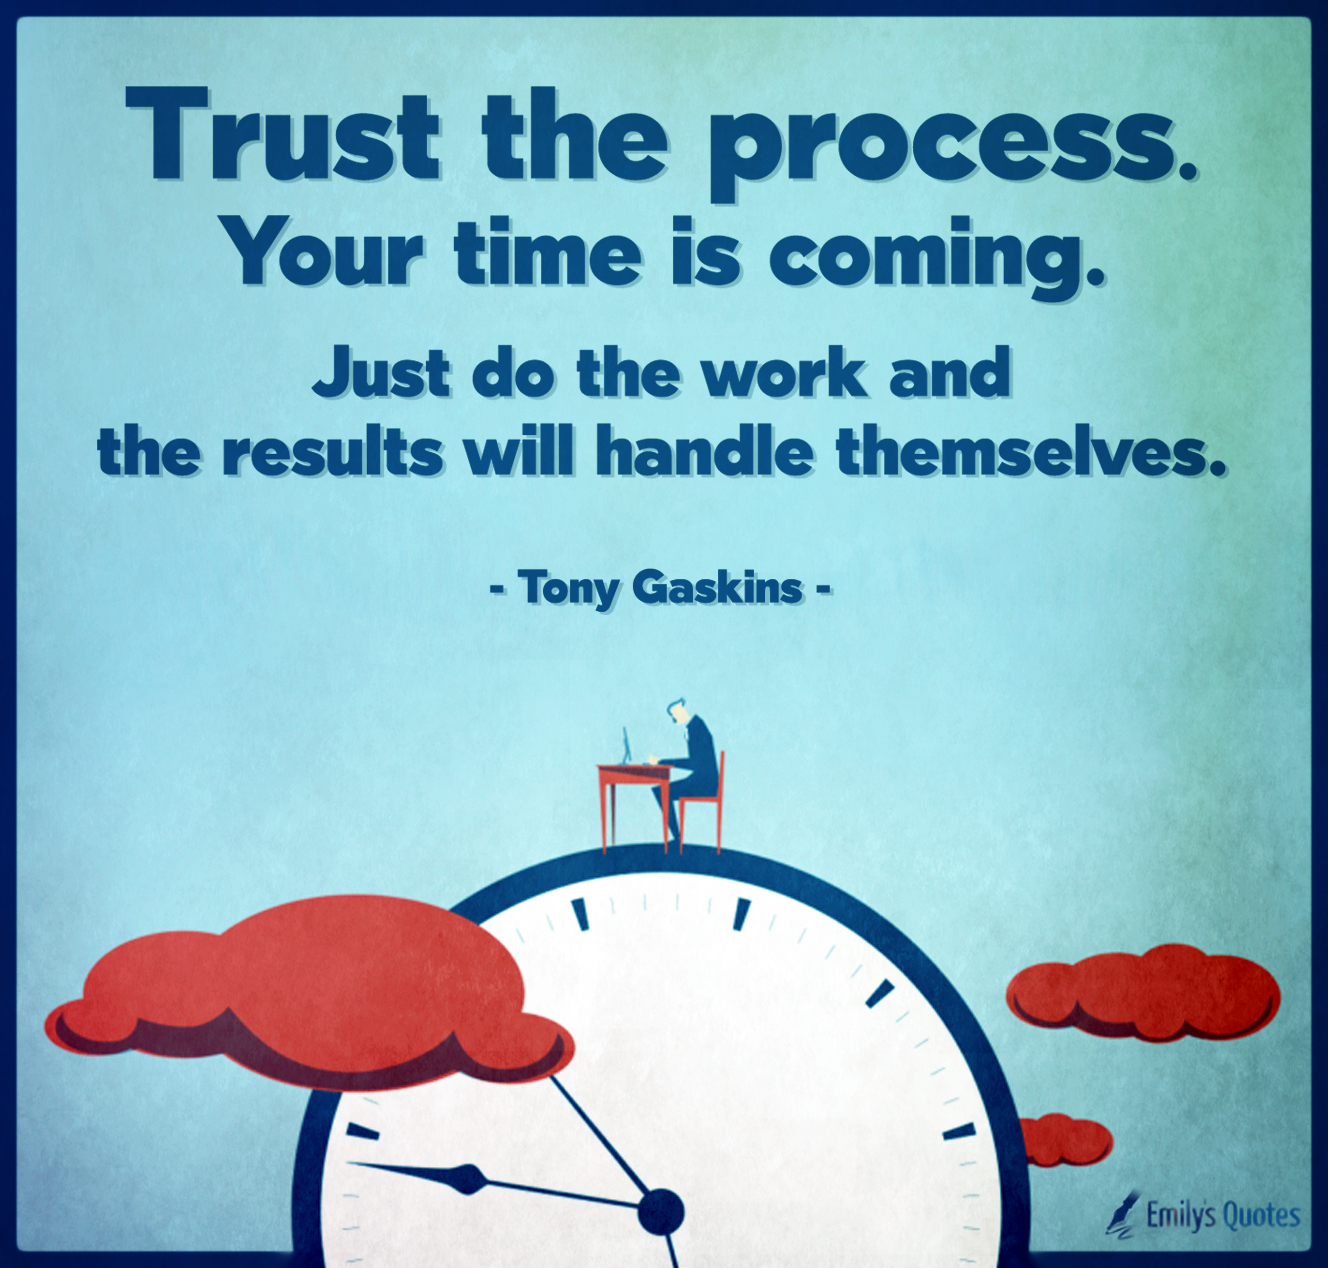 Trust the process. Your time is coming. Just do the work and the results will handle themselves